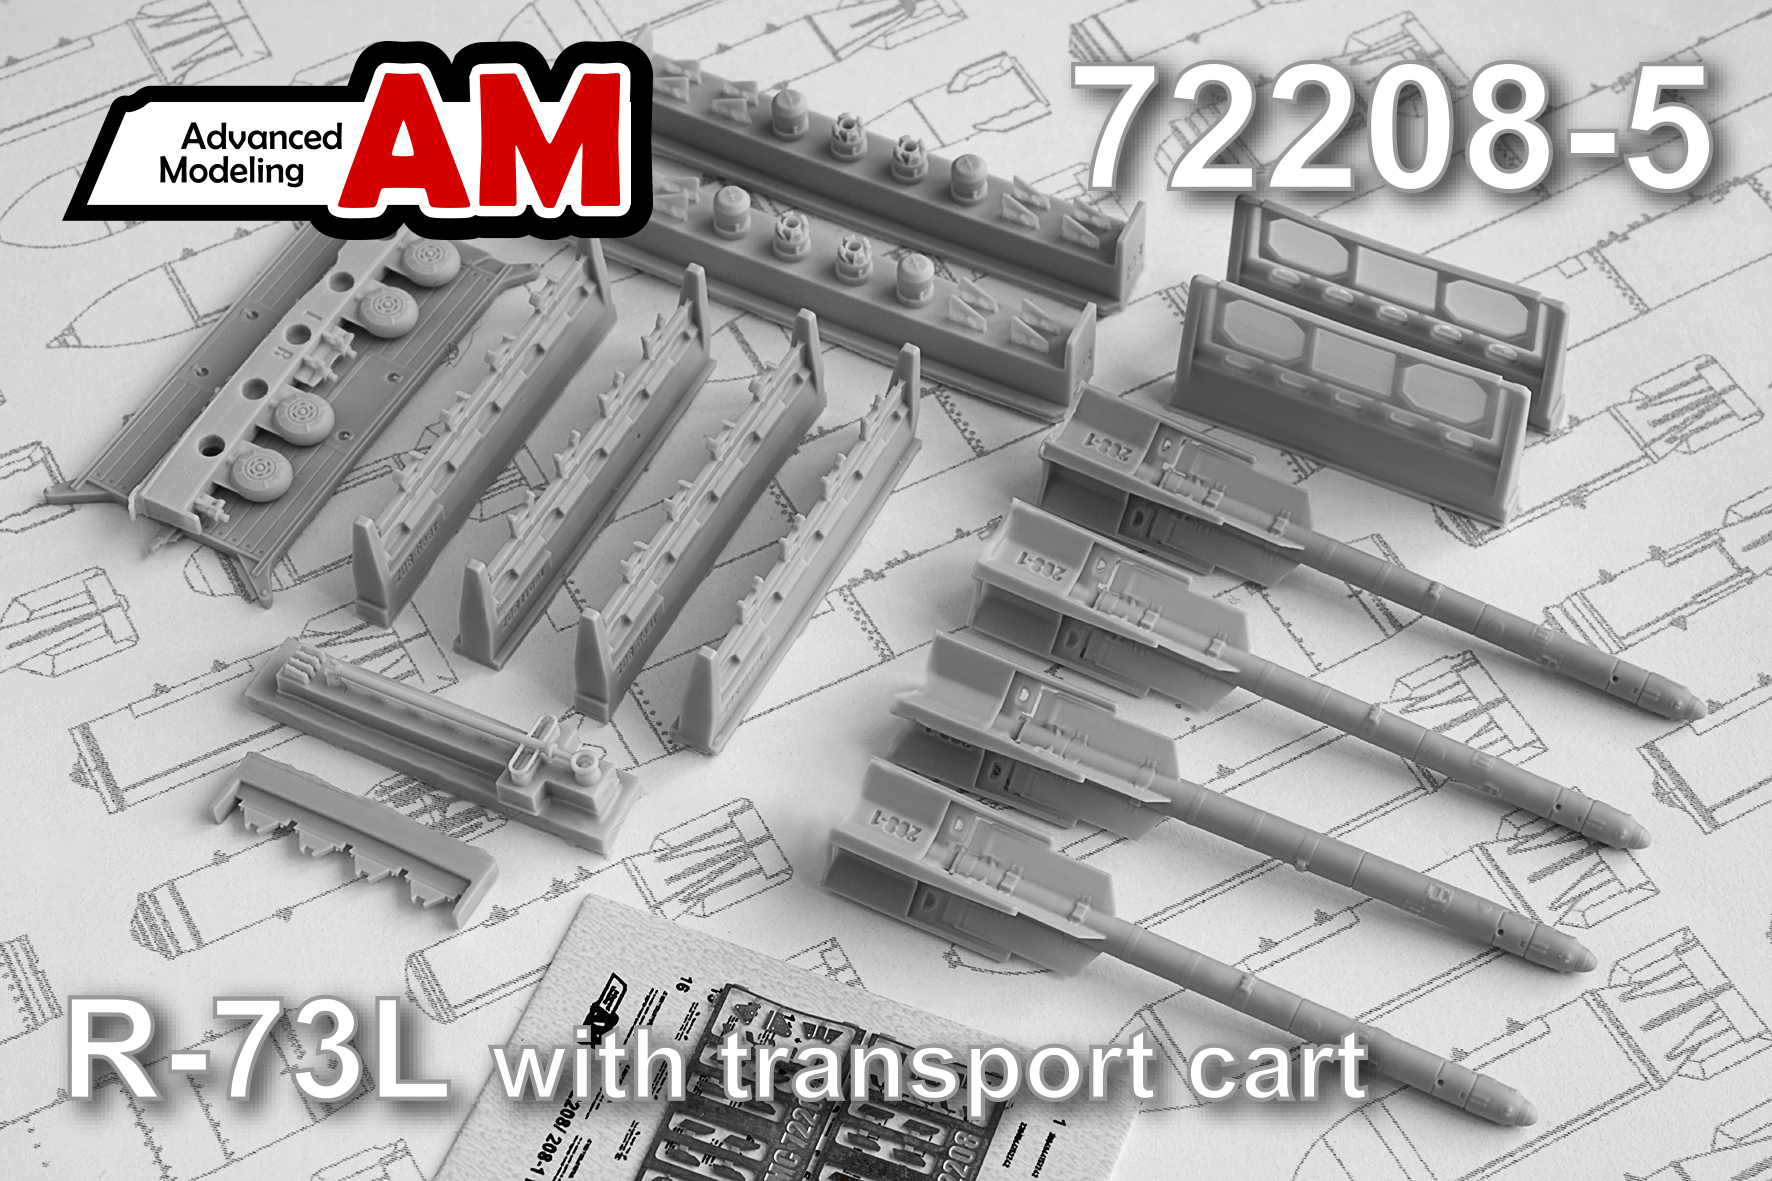 Additions (3D resin printing) 1/72 Transport cart with R-73 missiles (Advanced Modeling) 